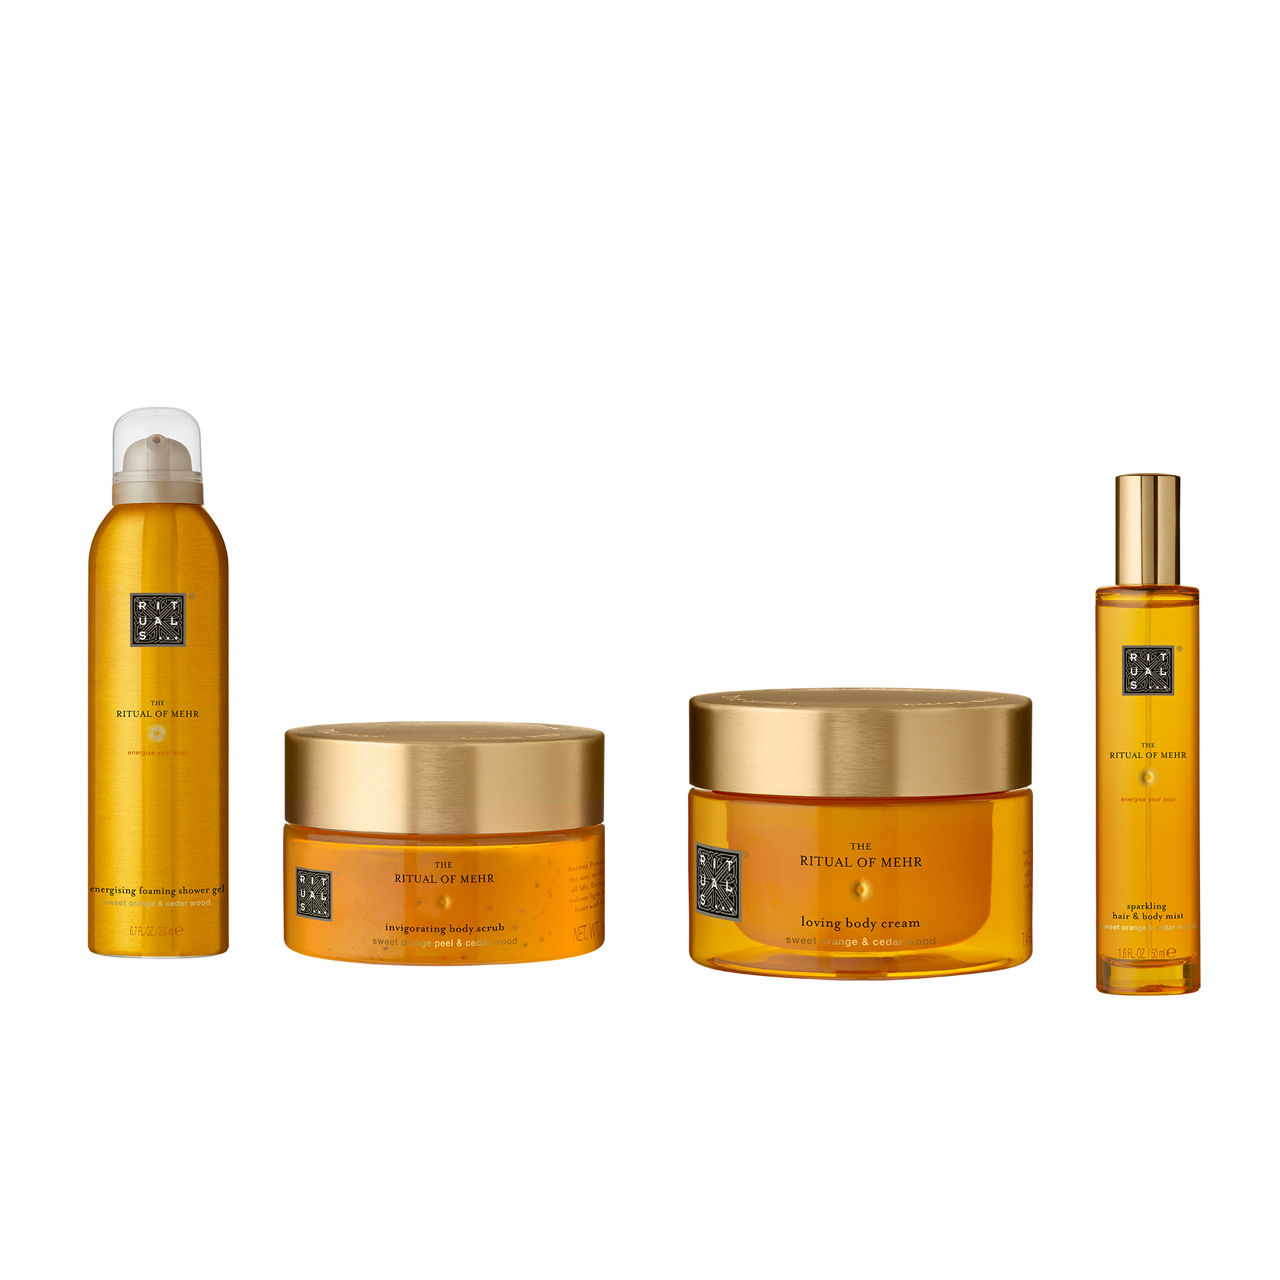 RITUALS The Ritual of Mehr Body Care Collection